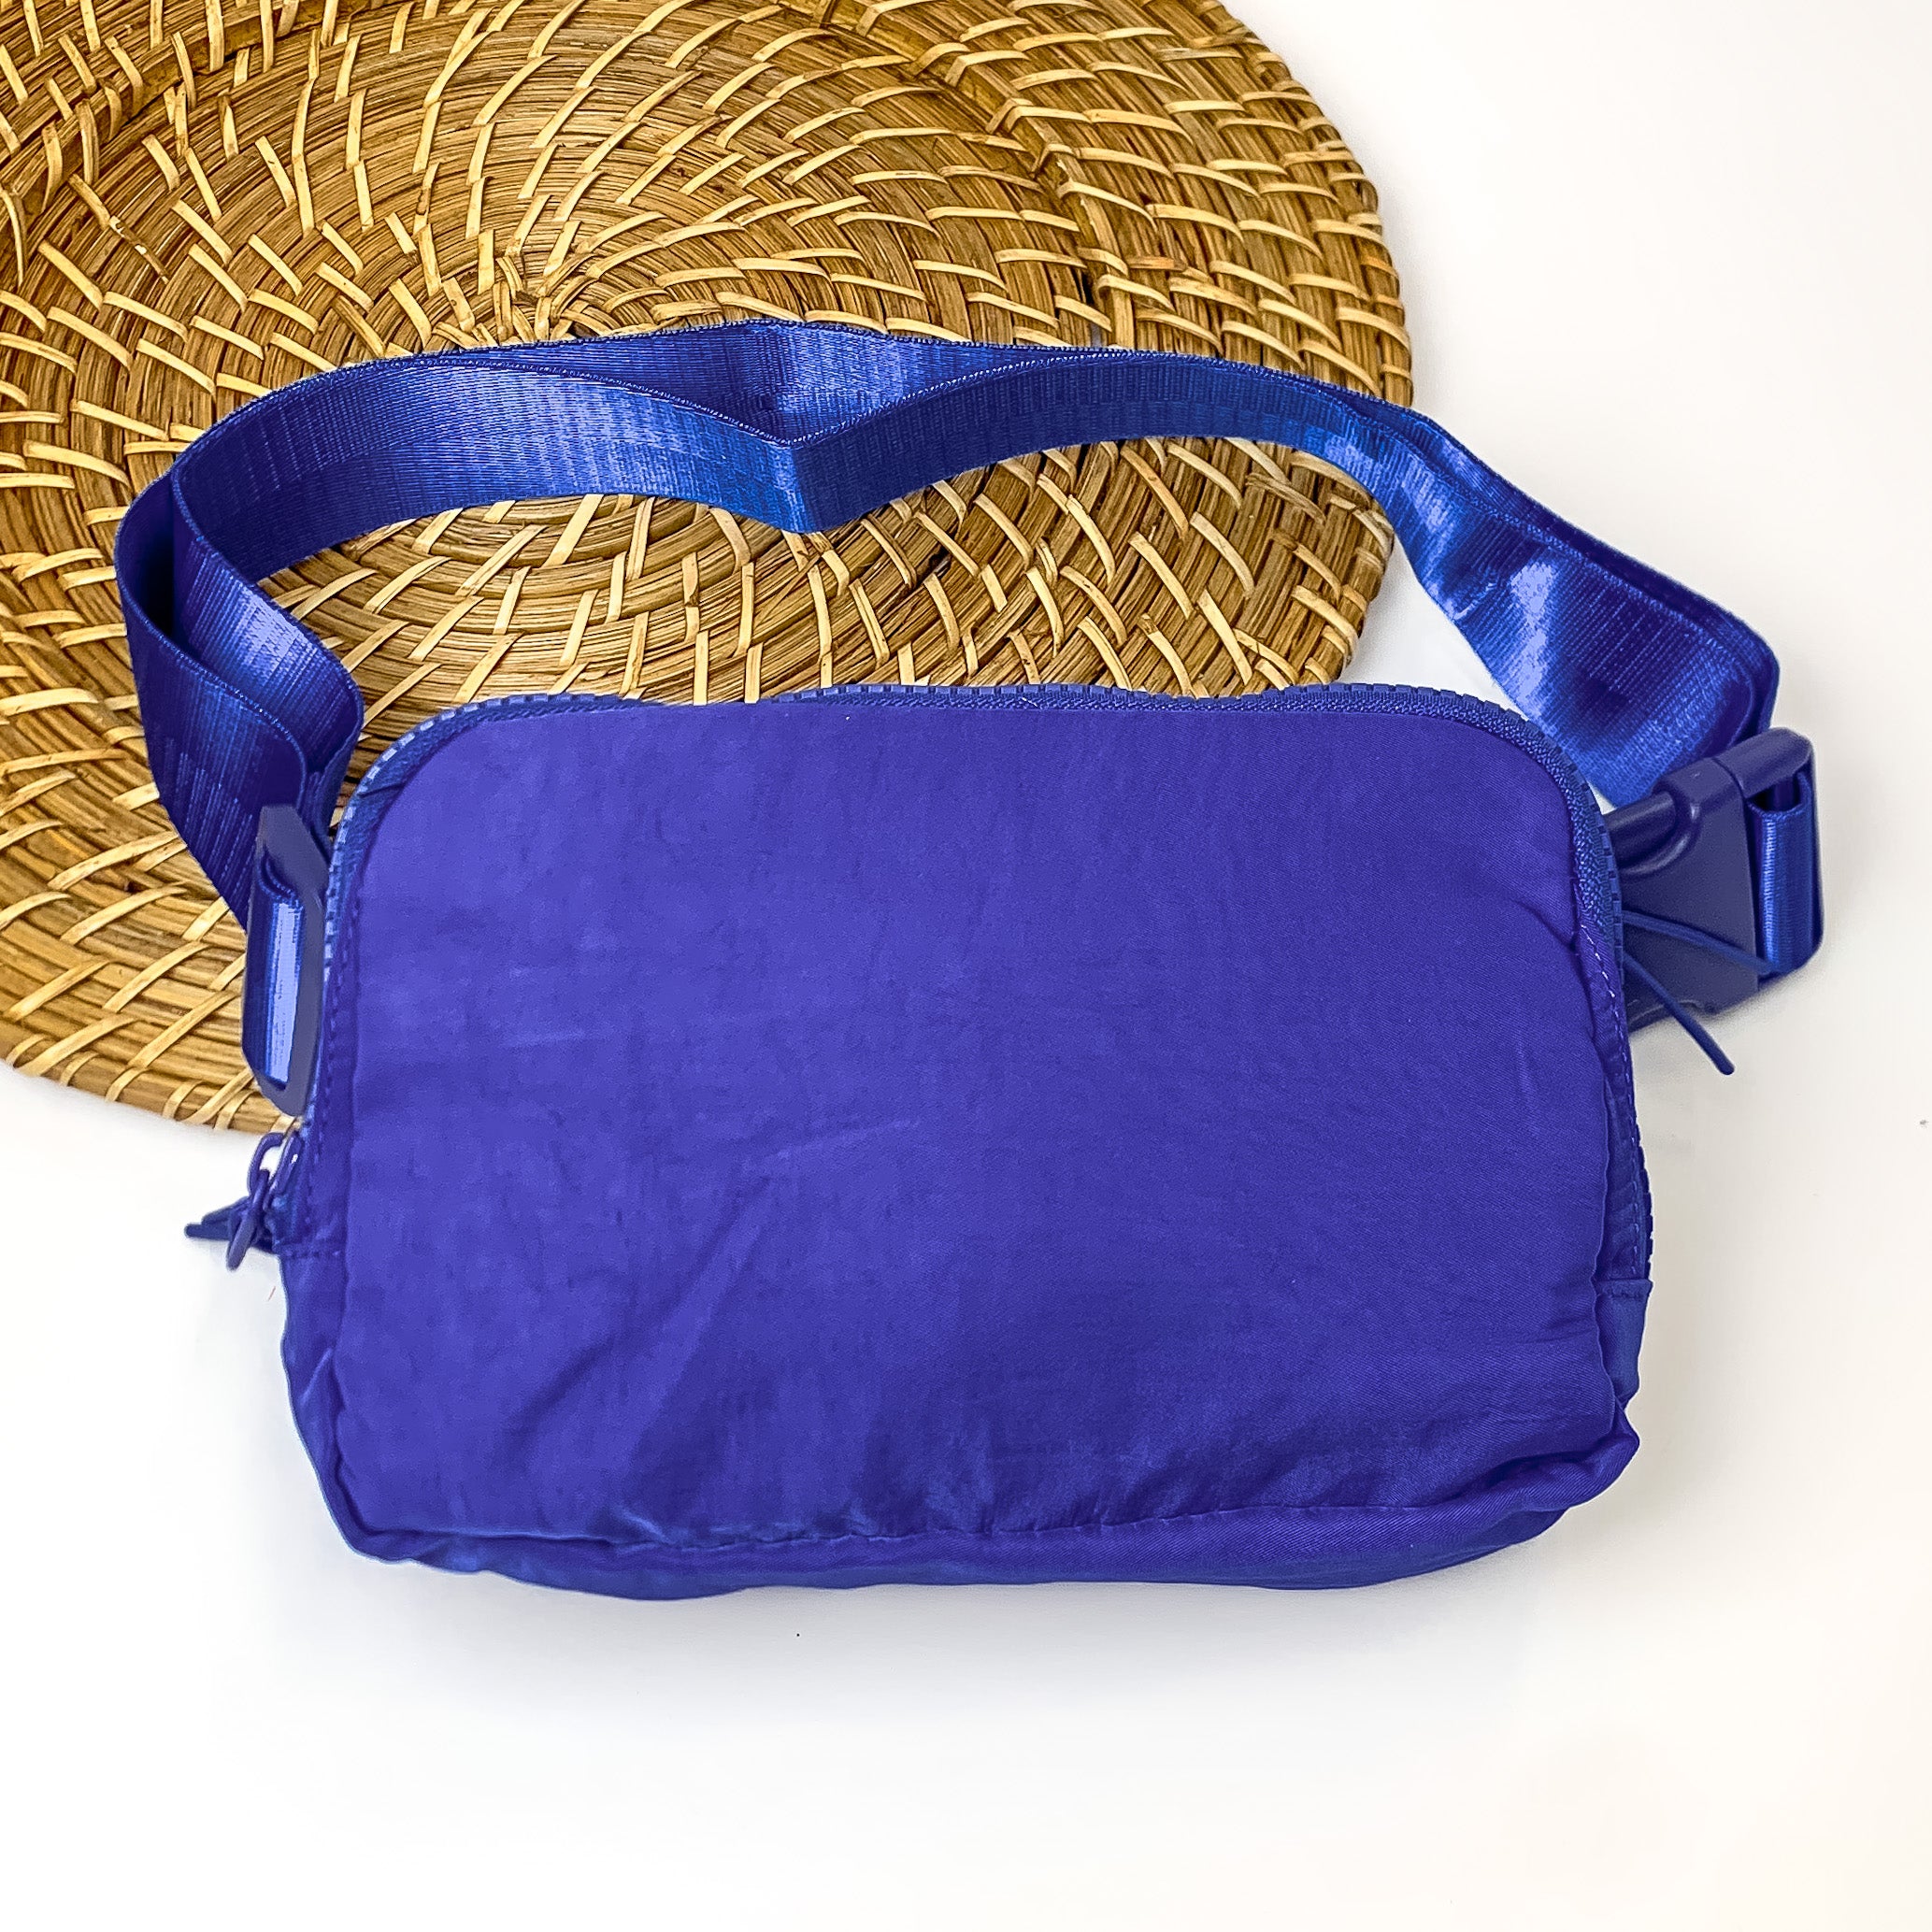 Pictured is a rectangle fanny pack with a top zipper with tassel in royal blue. This bag also includes a royal blue strap and royal blue accents. This bag is pictured on a white and brown patterned background.